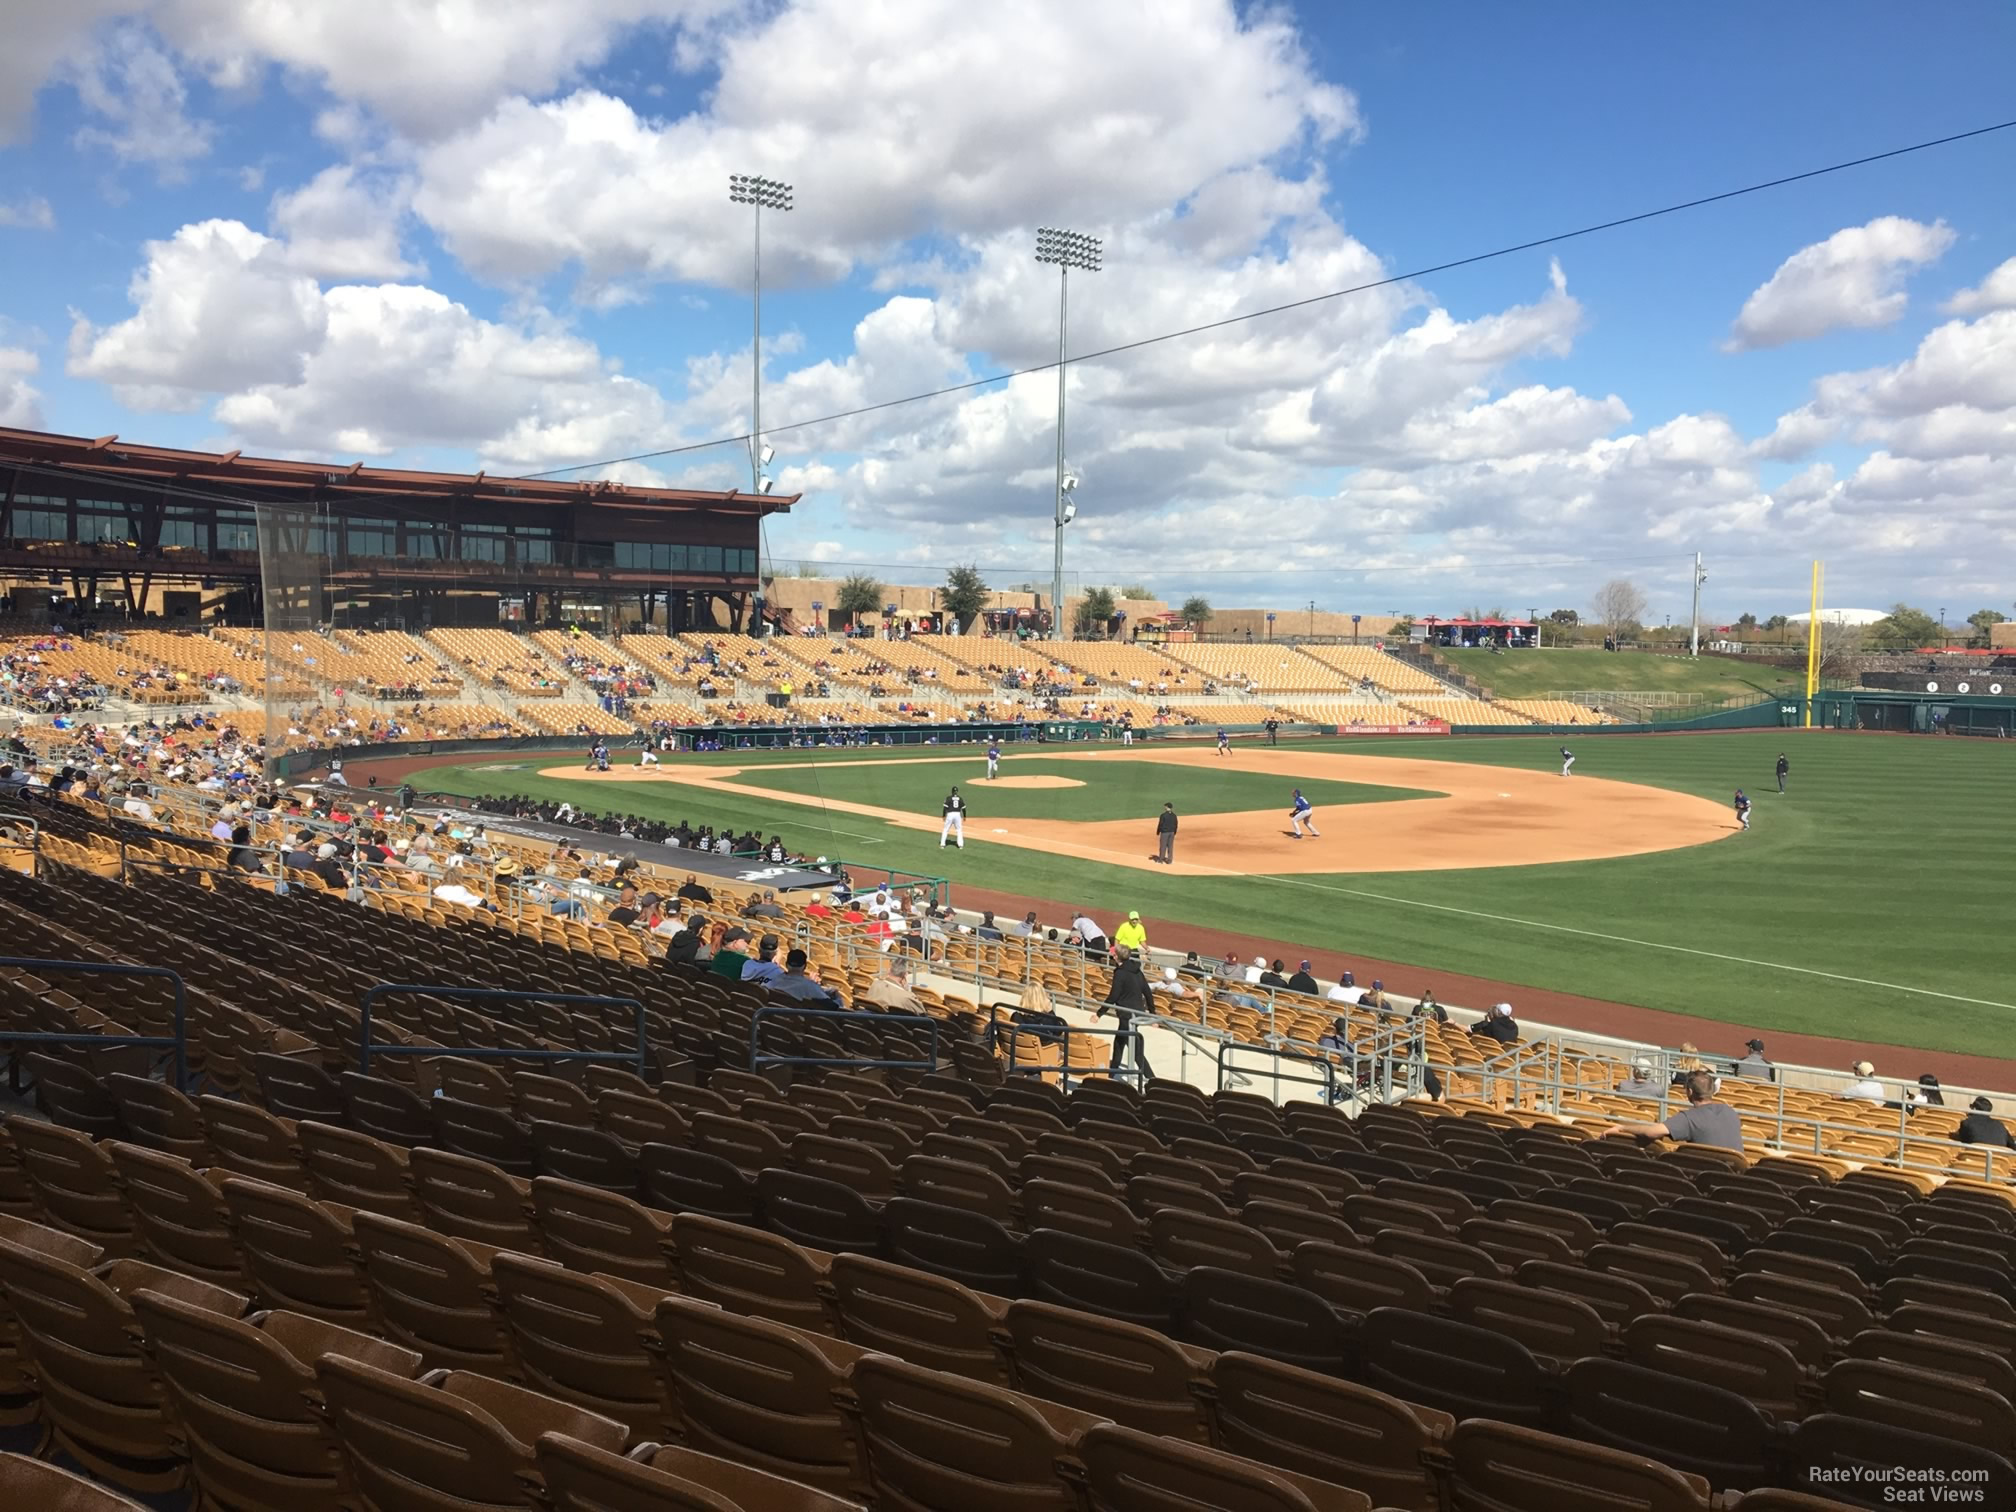 section 103, row 18 seat view  - camelback ranch